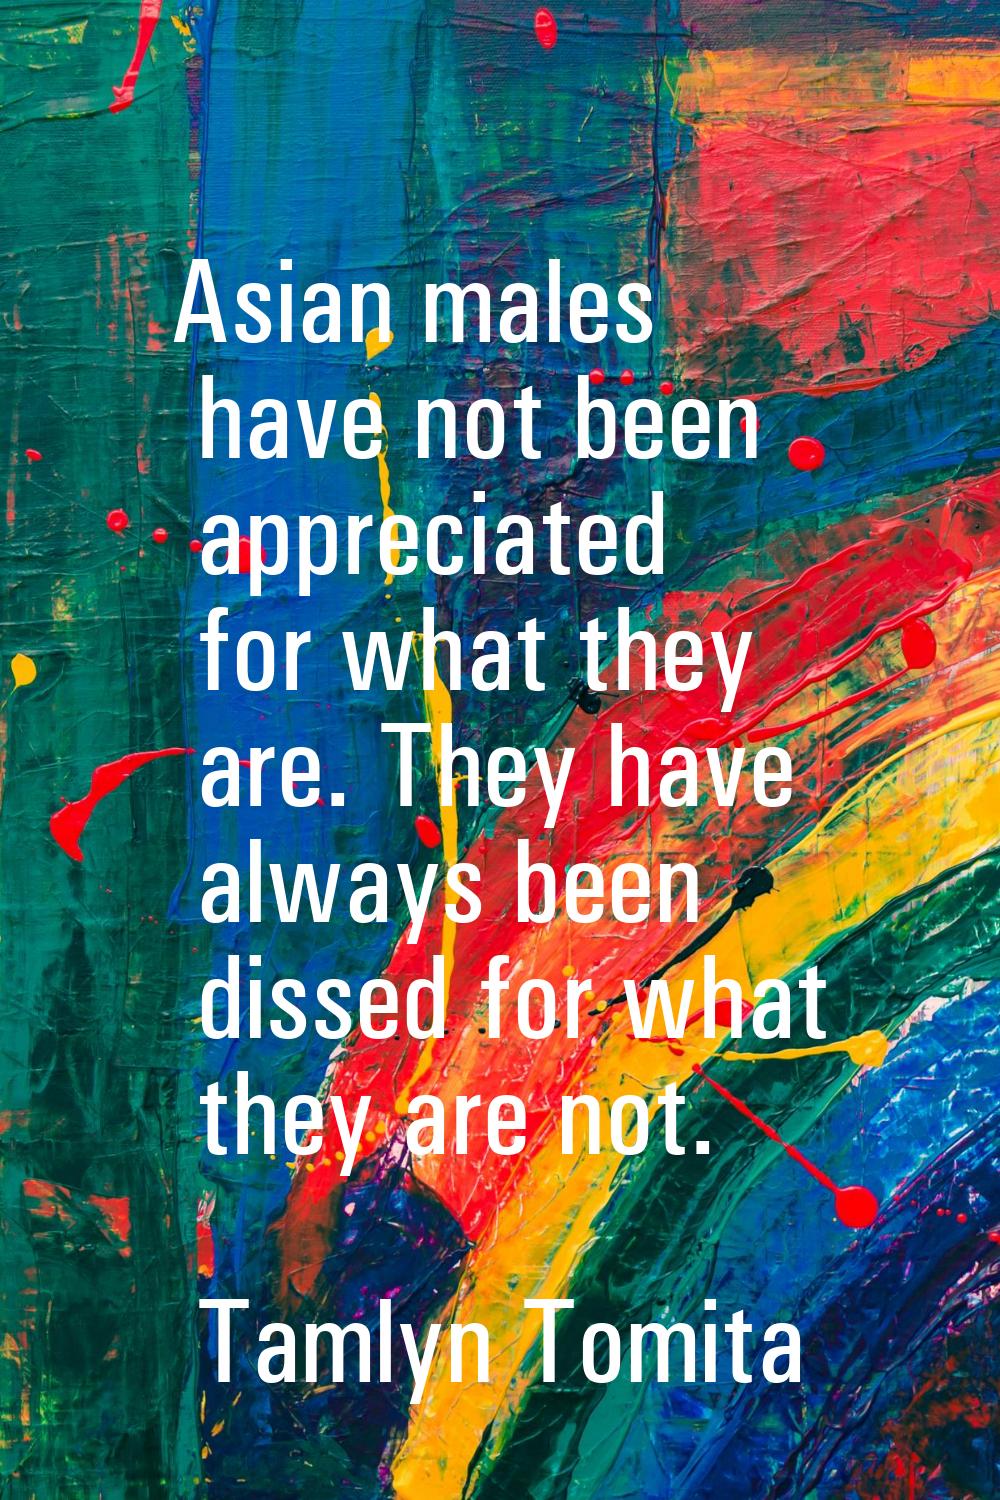 Asian males have not been appreciated for what they are. They have always been dissed for what they